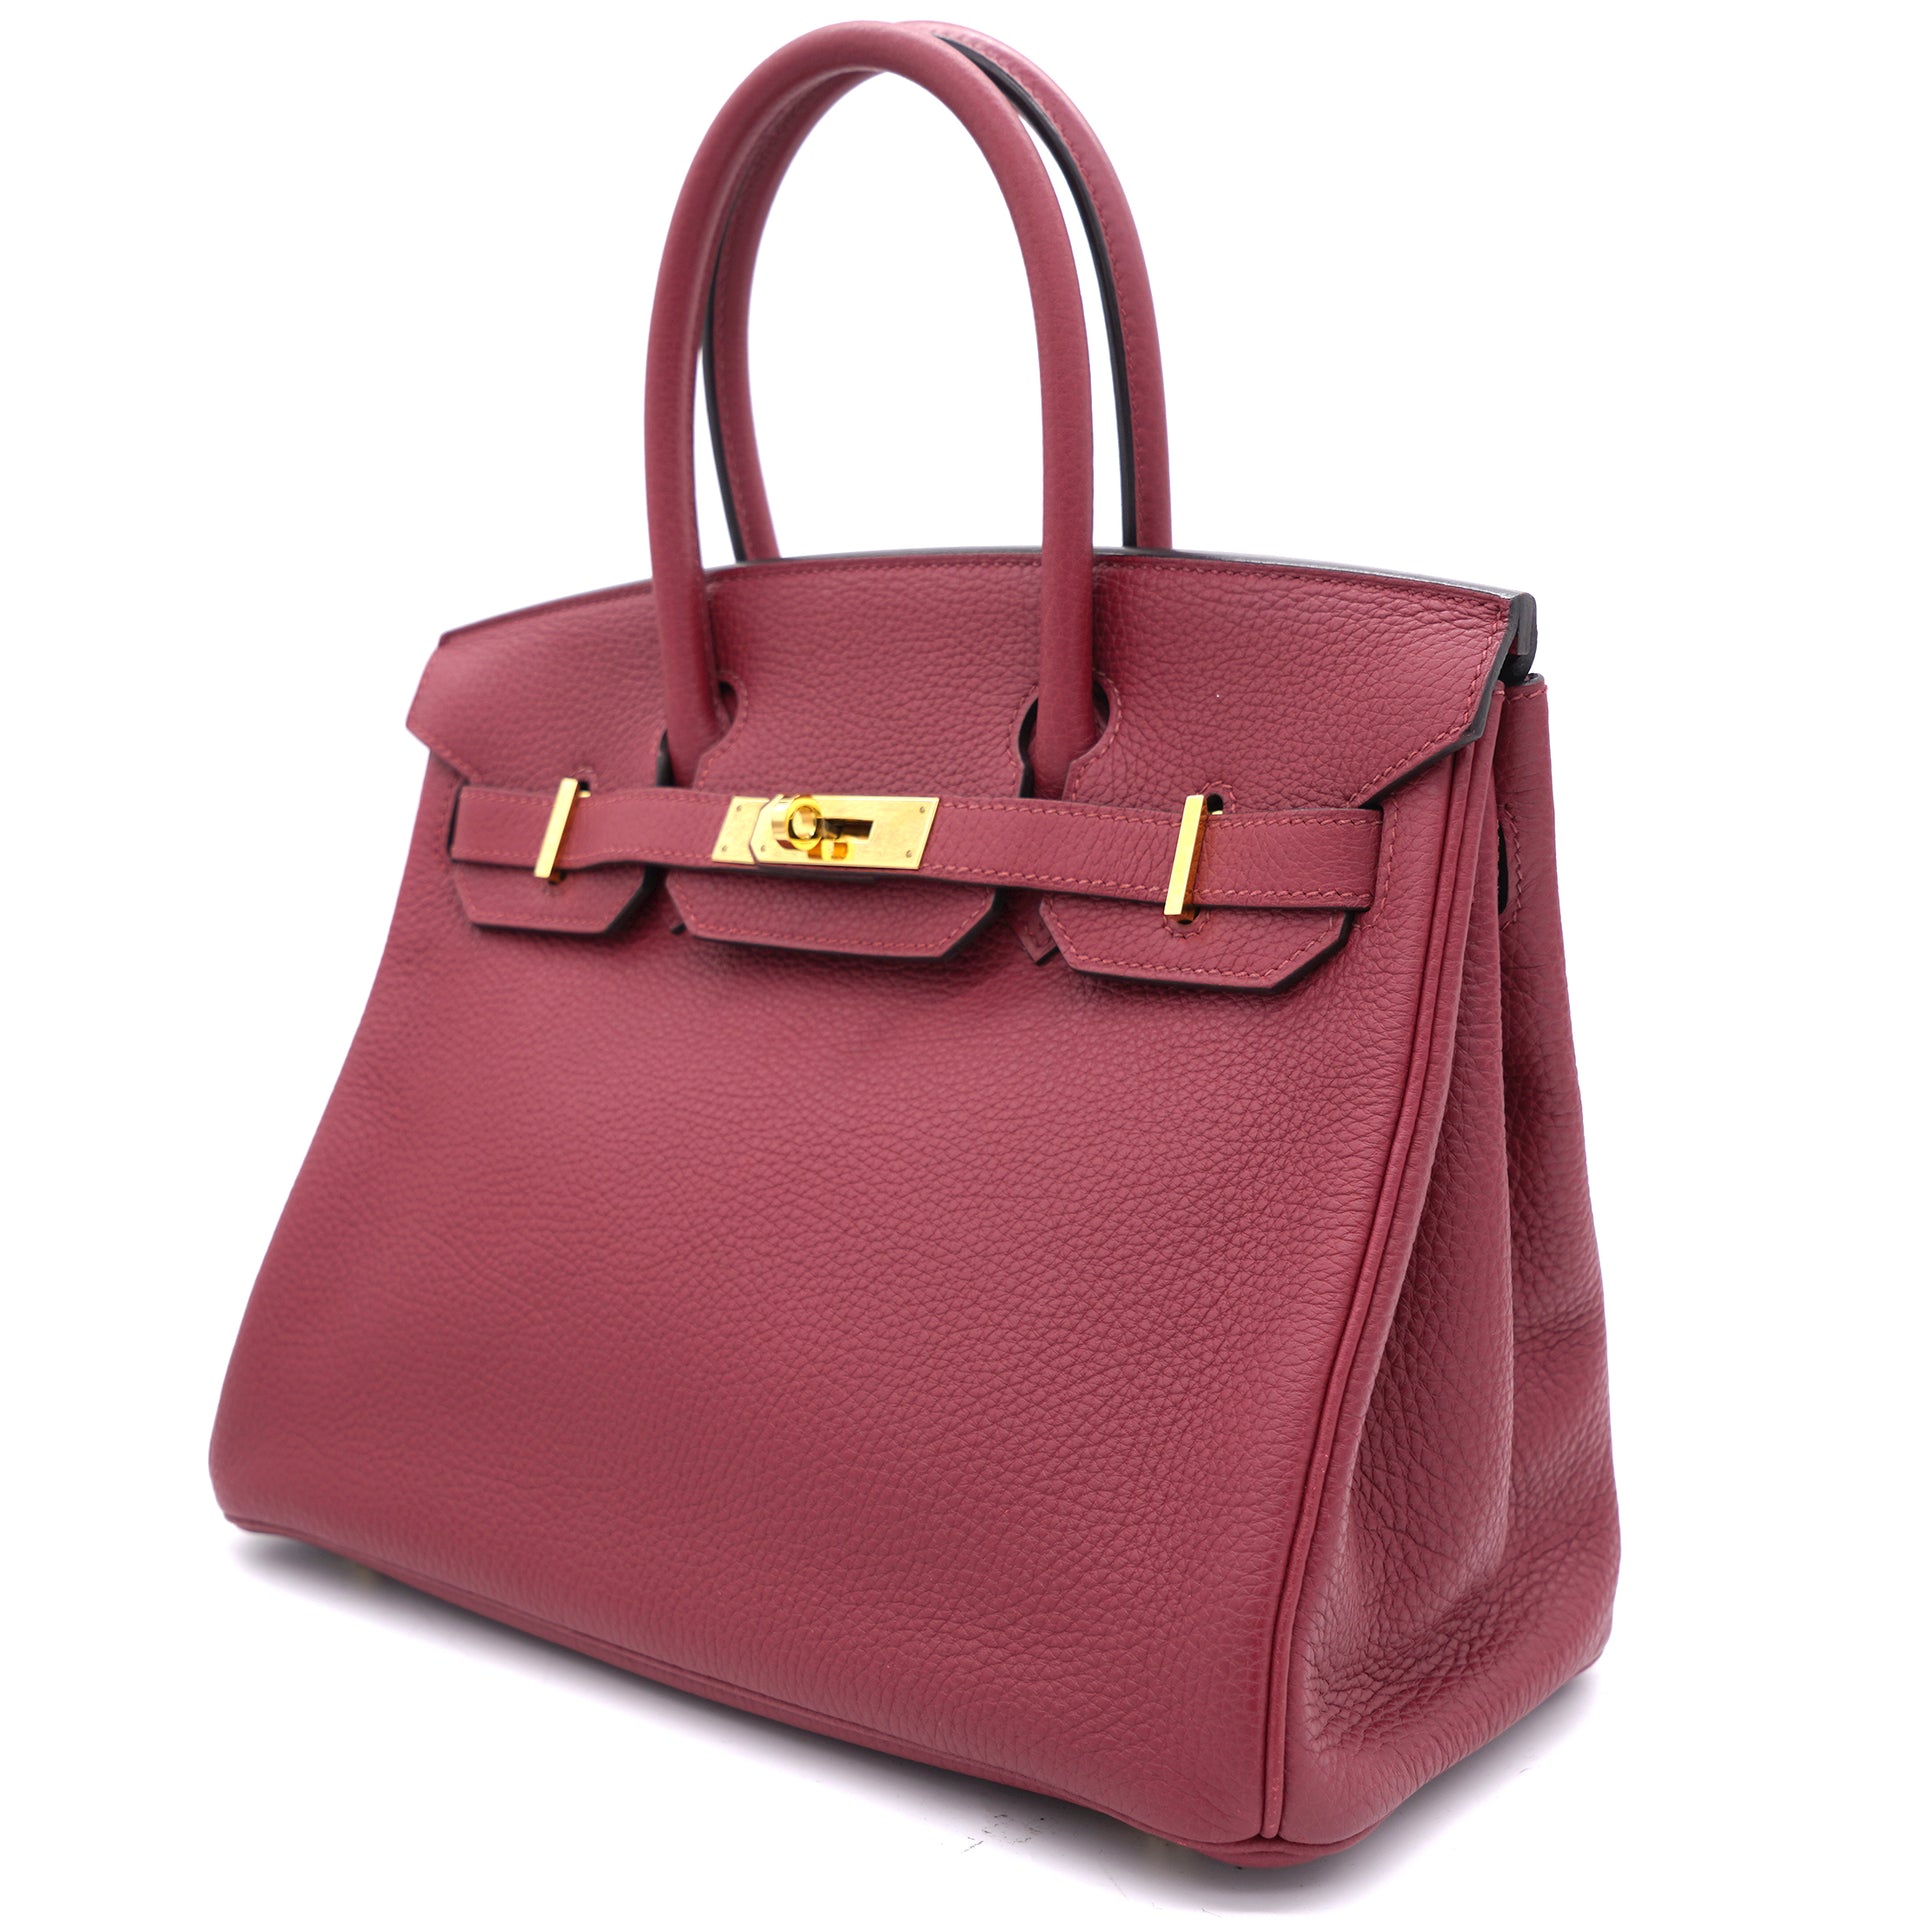 Hermes Birkin 30 Bag Rouge H Gold Hardware Clemence Leather New w